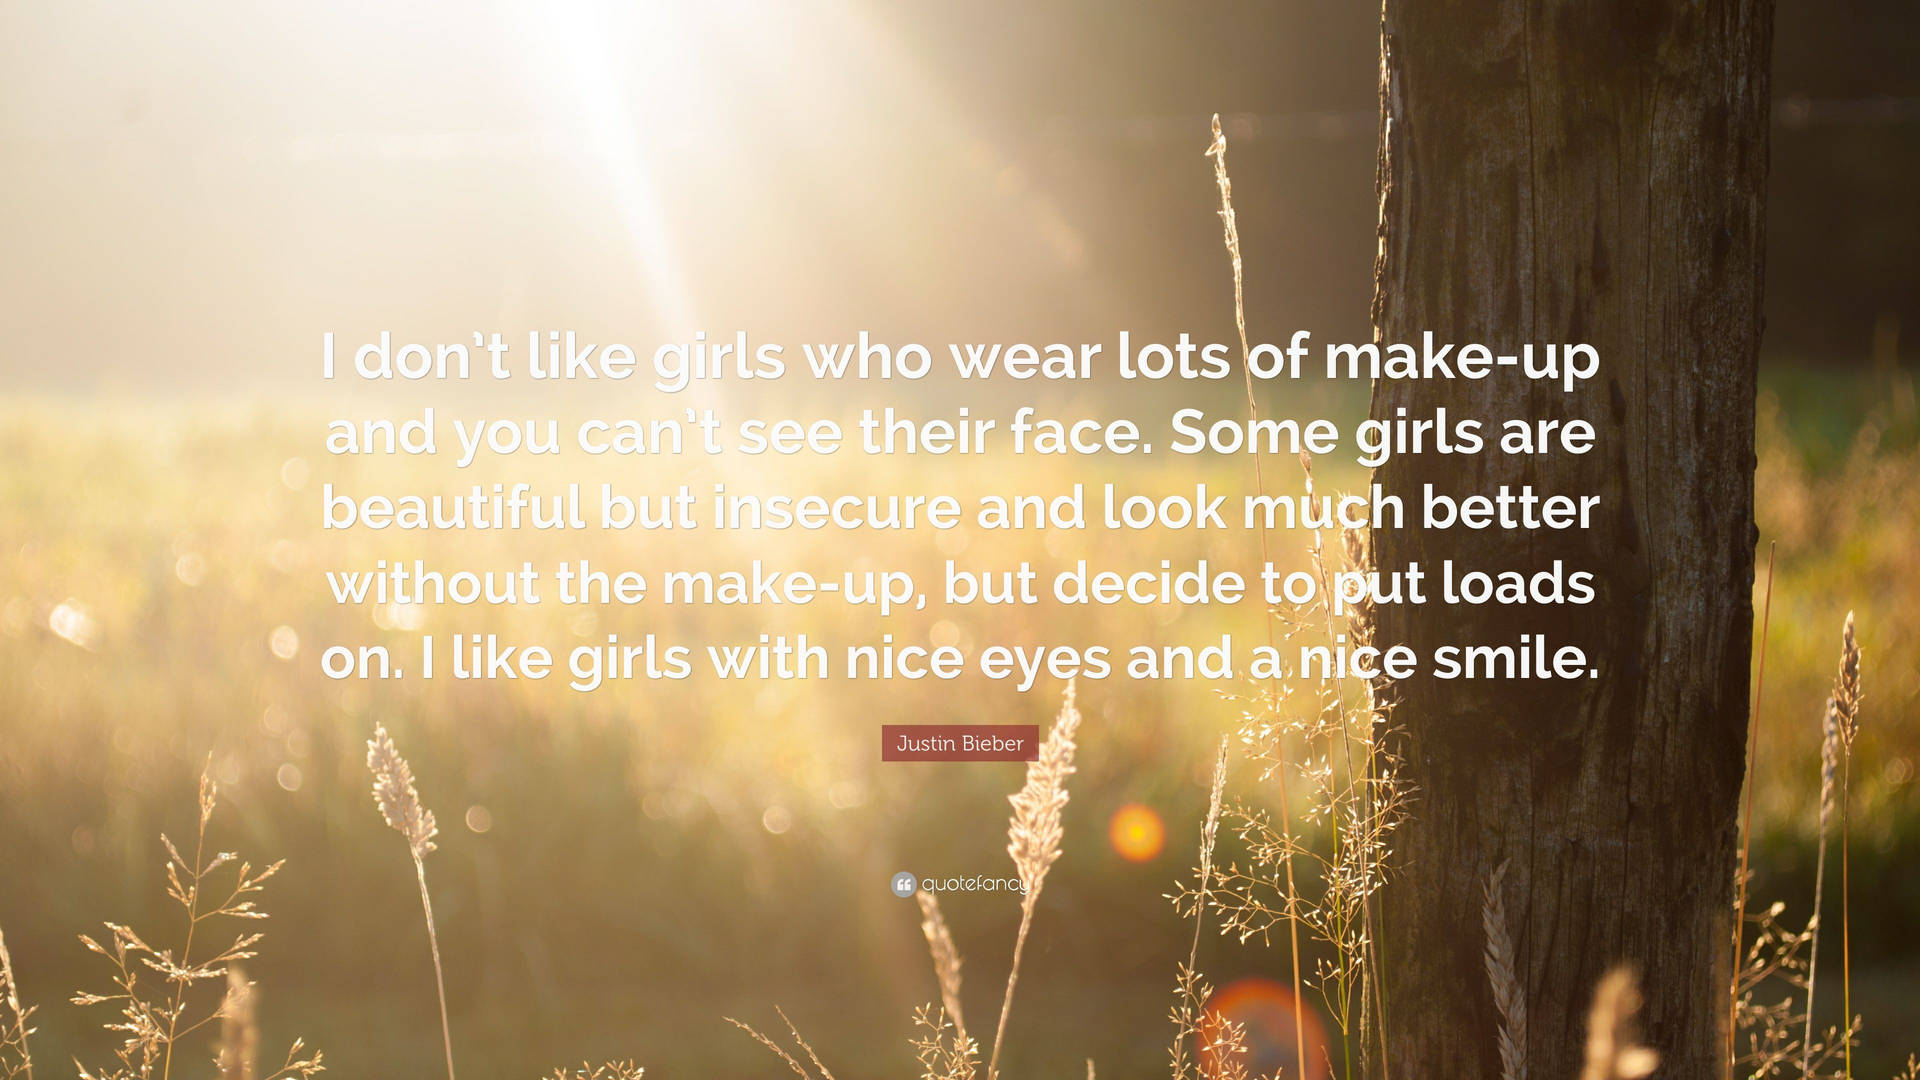 Justin Bieber Insecure Girls Quote Background